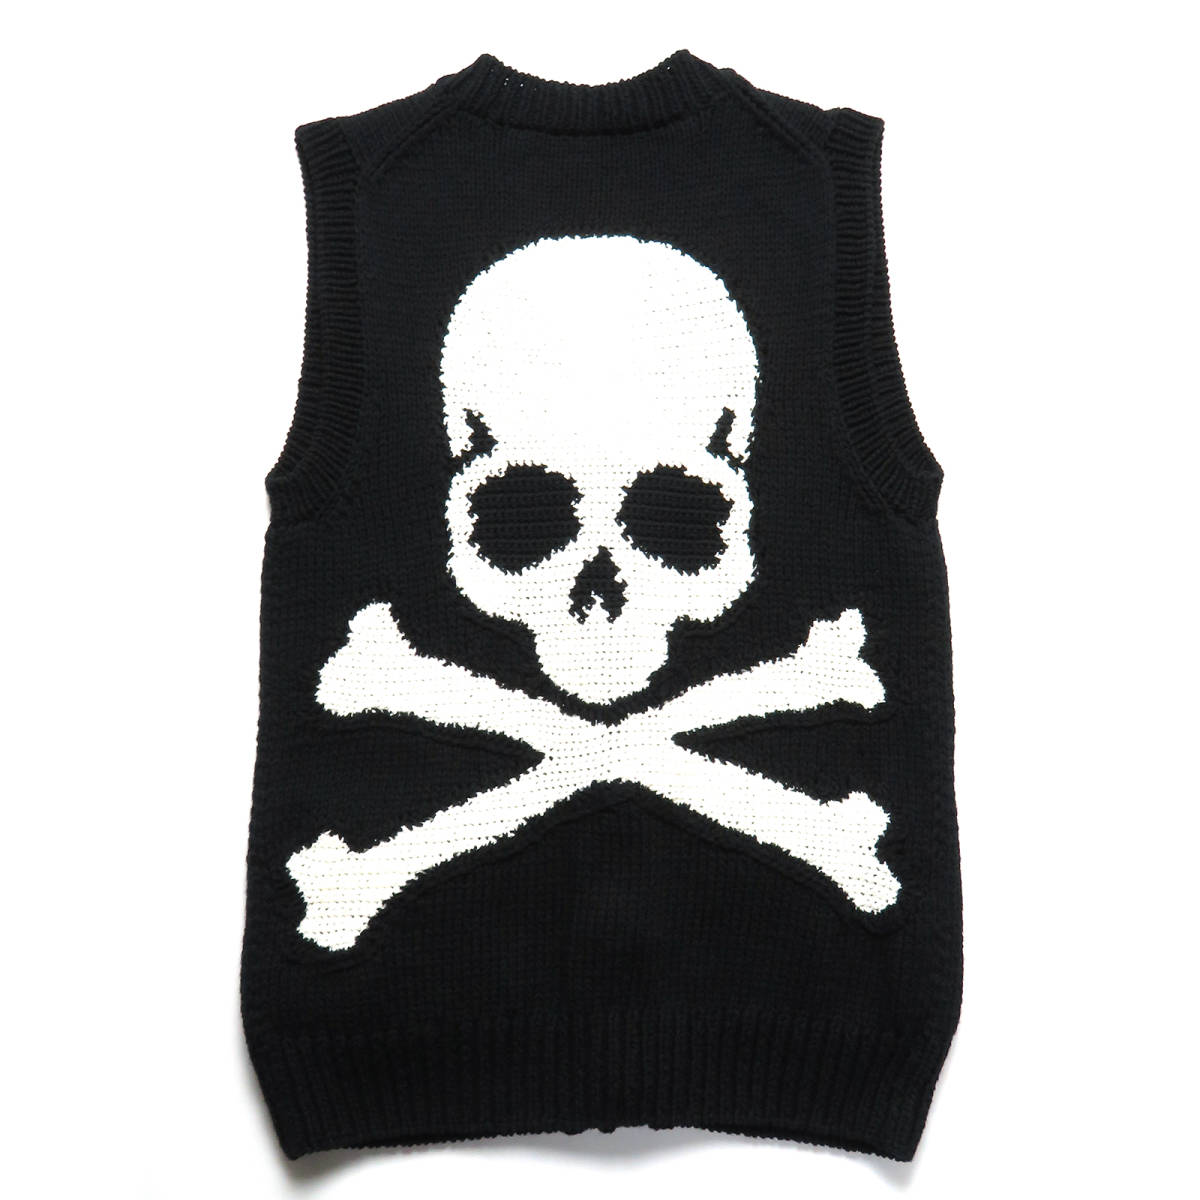  ultimate beautiful goods mastermind JAPAN master ma India big Skull reversible knitted the best piece Mark S size men's black free shipping 